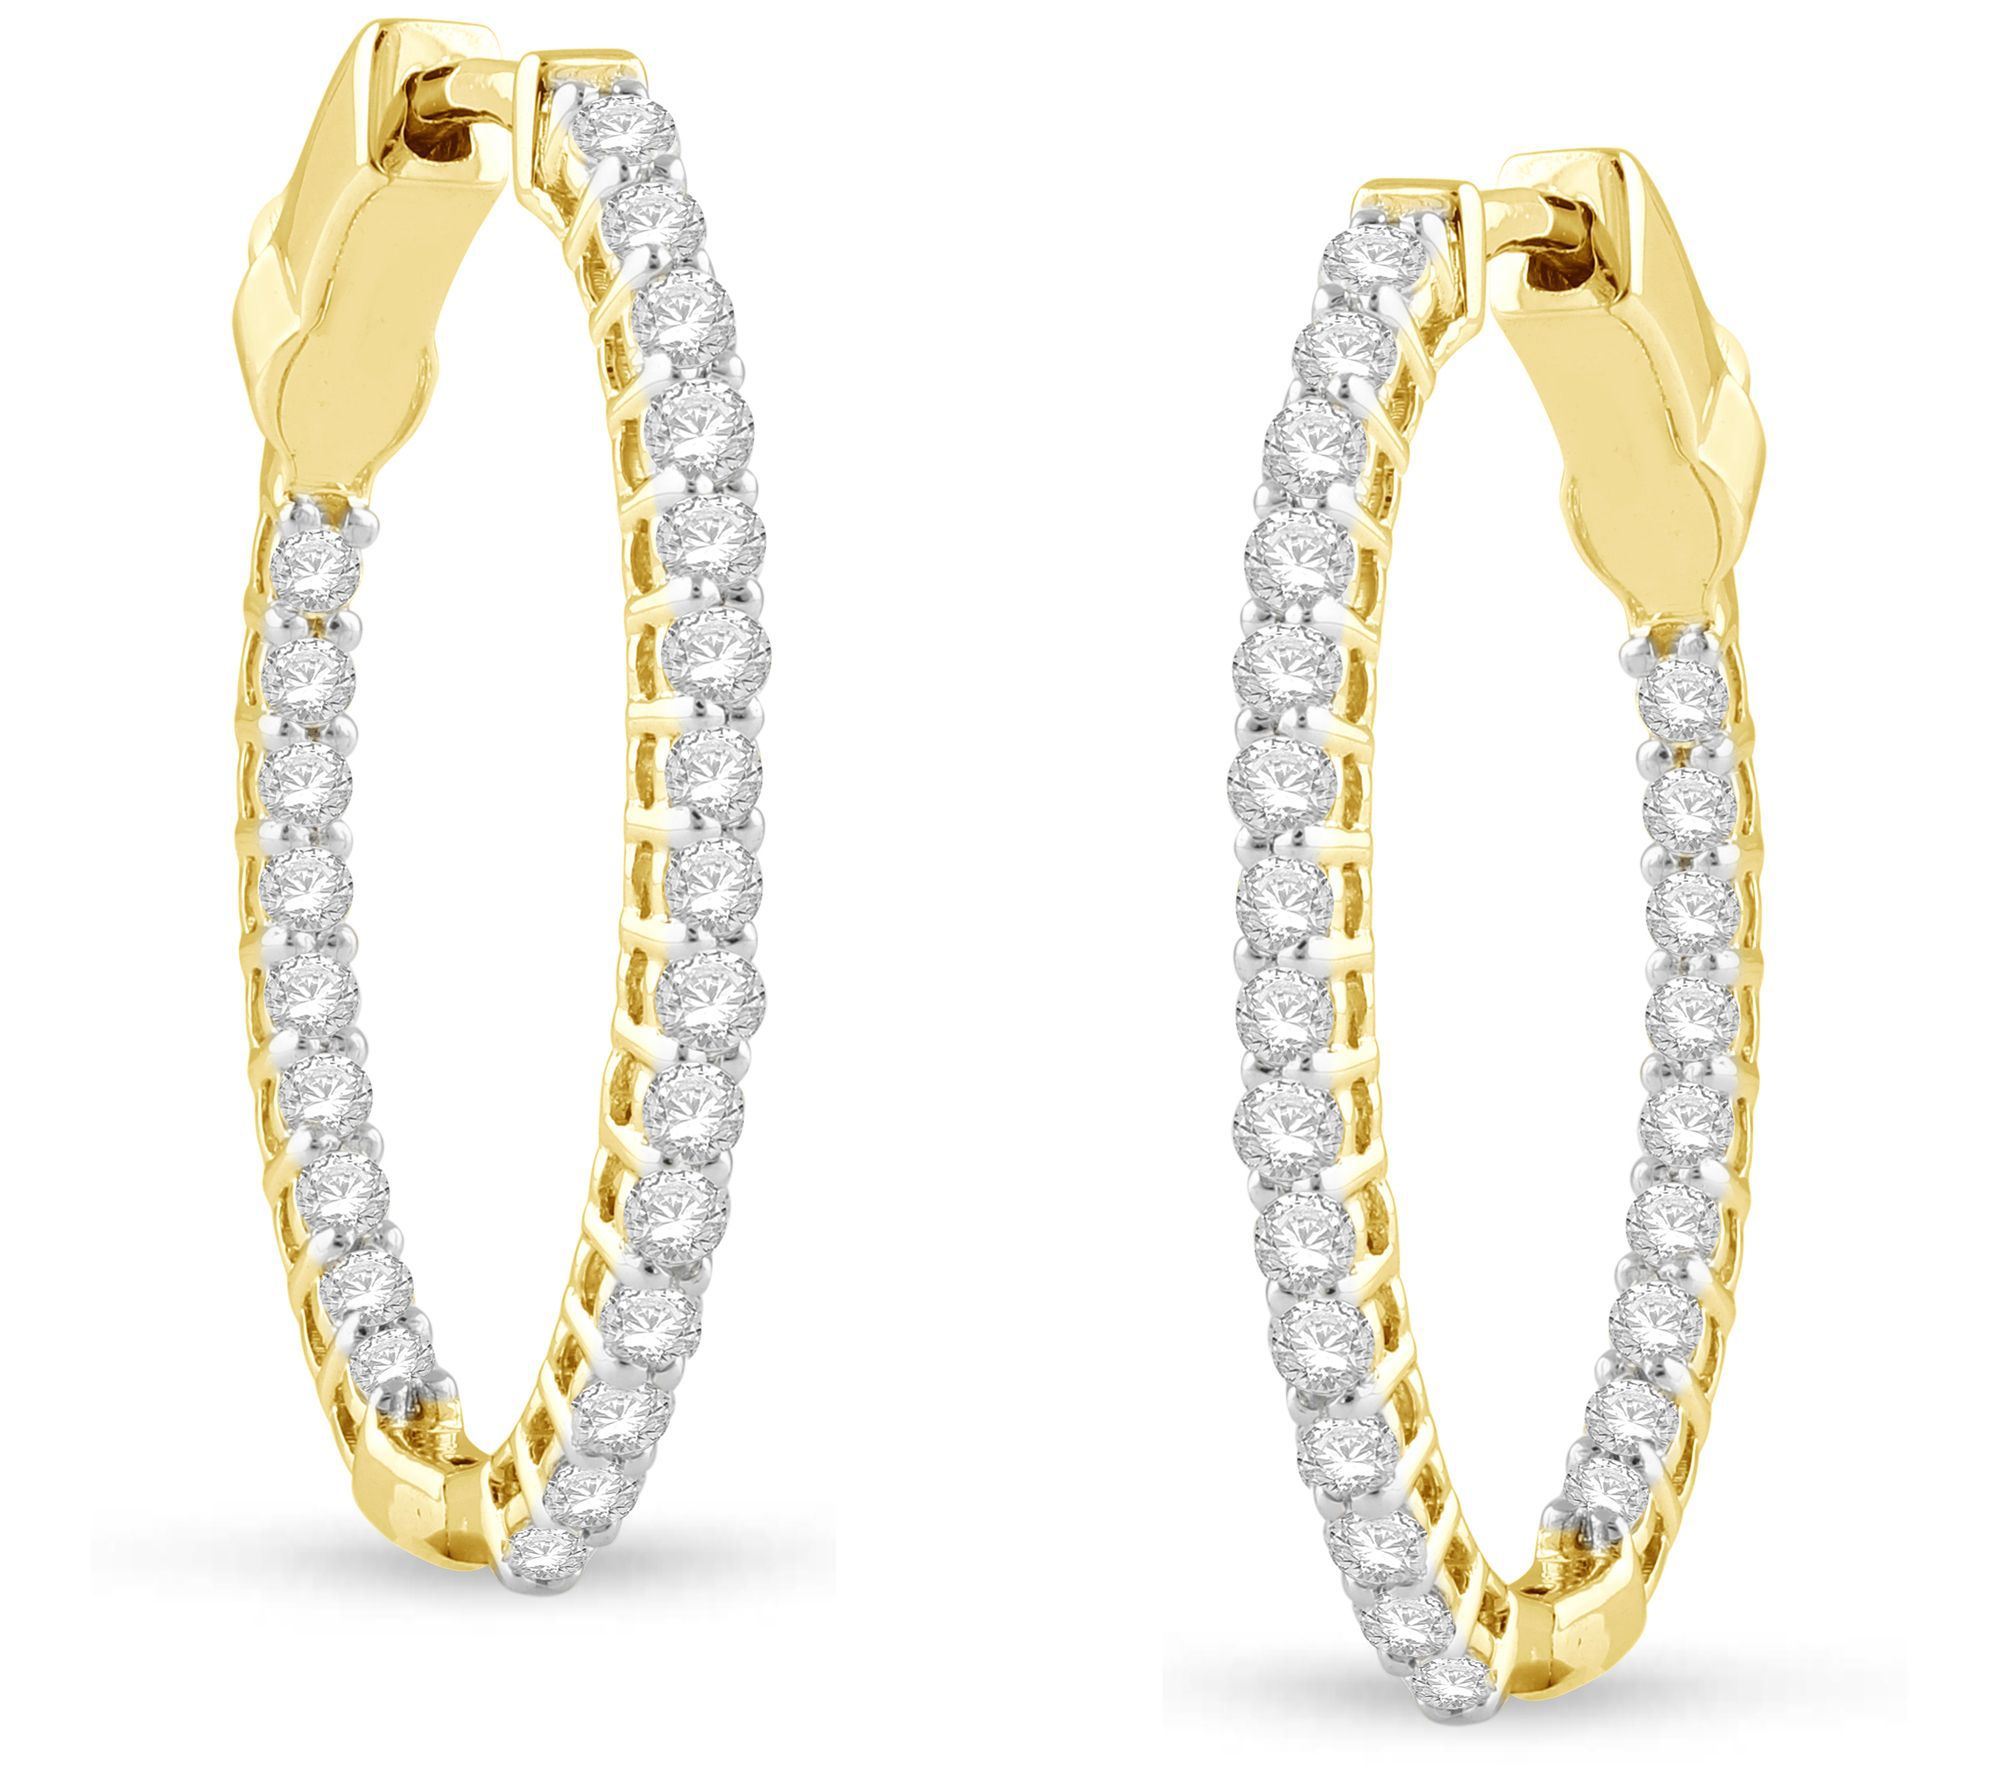 Affinity 1.00 cttw Diamond Inside Out Hoop Earrings, 14K Gold - QVC.com